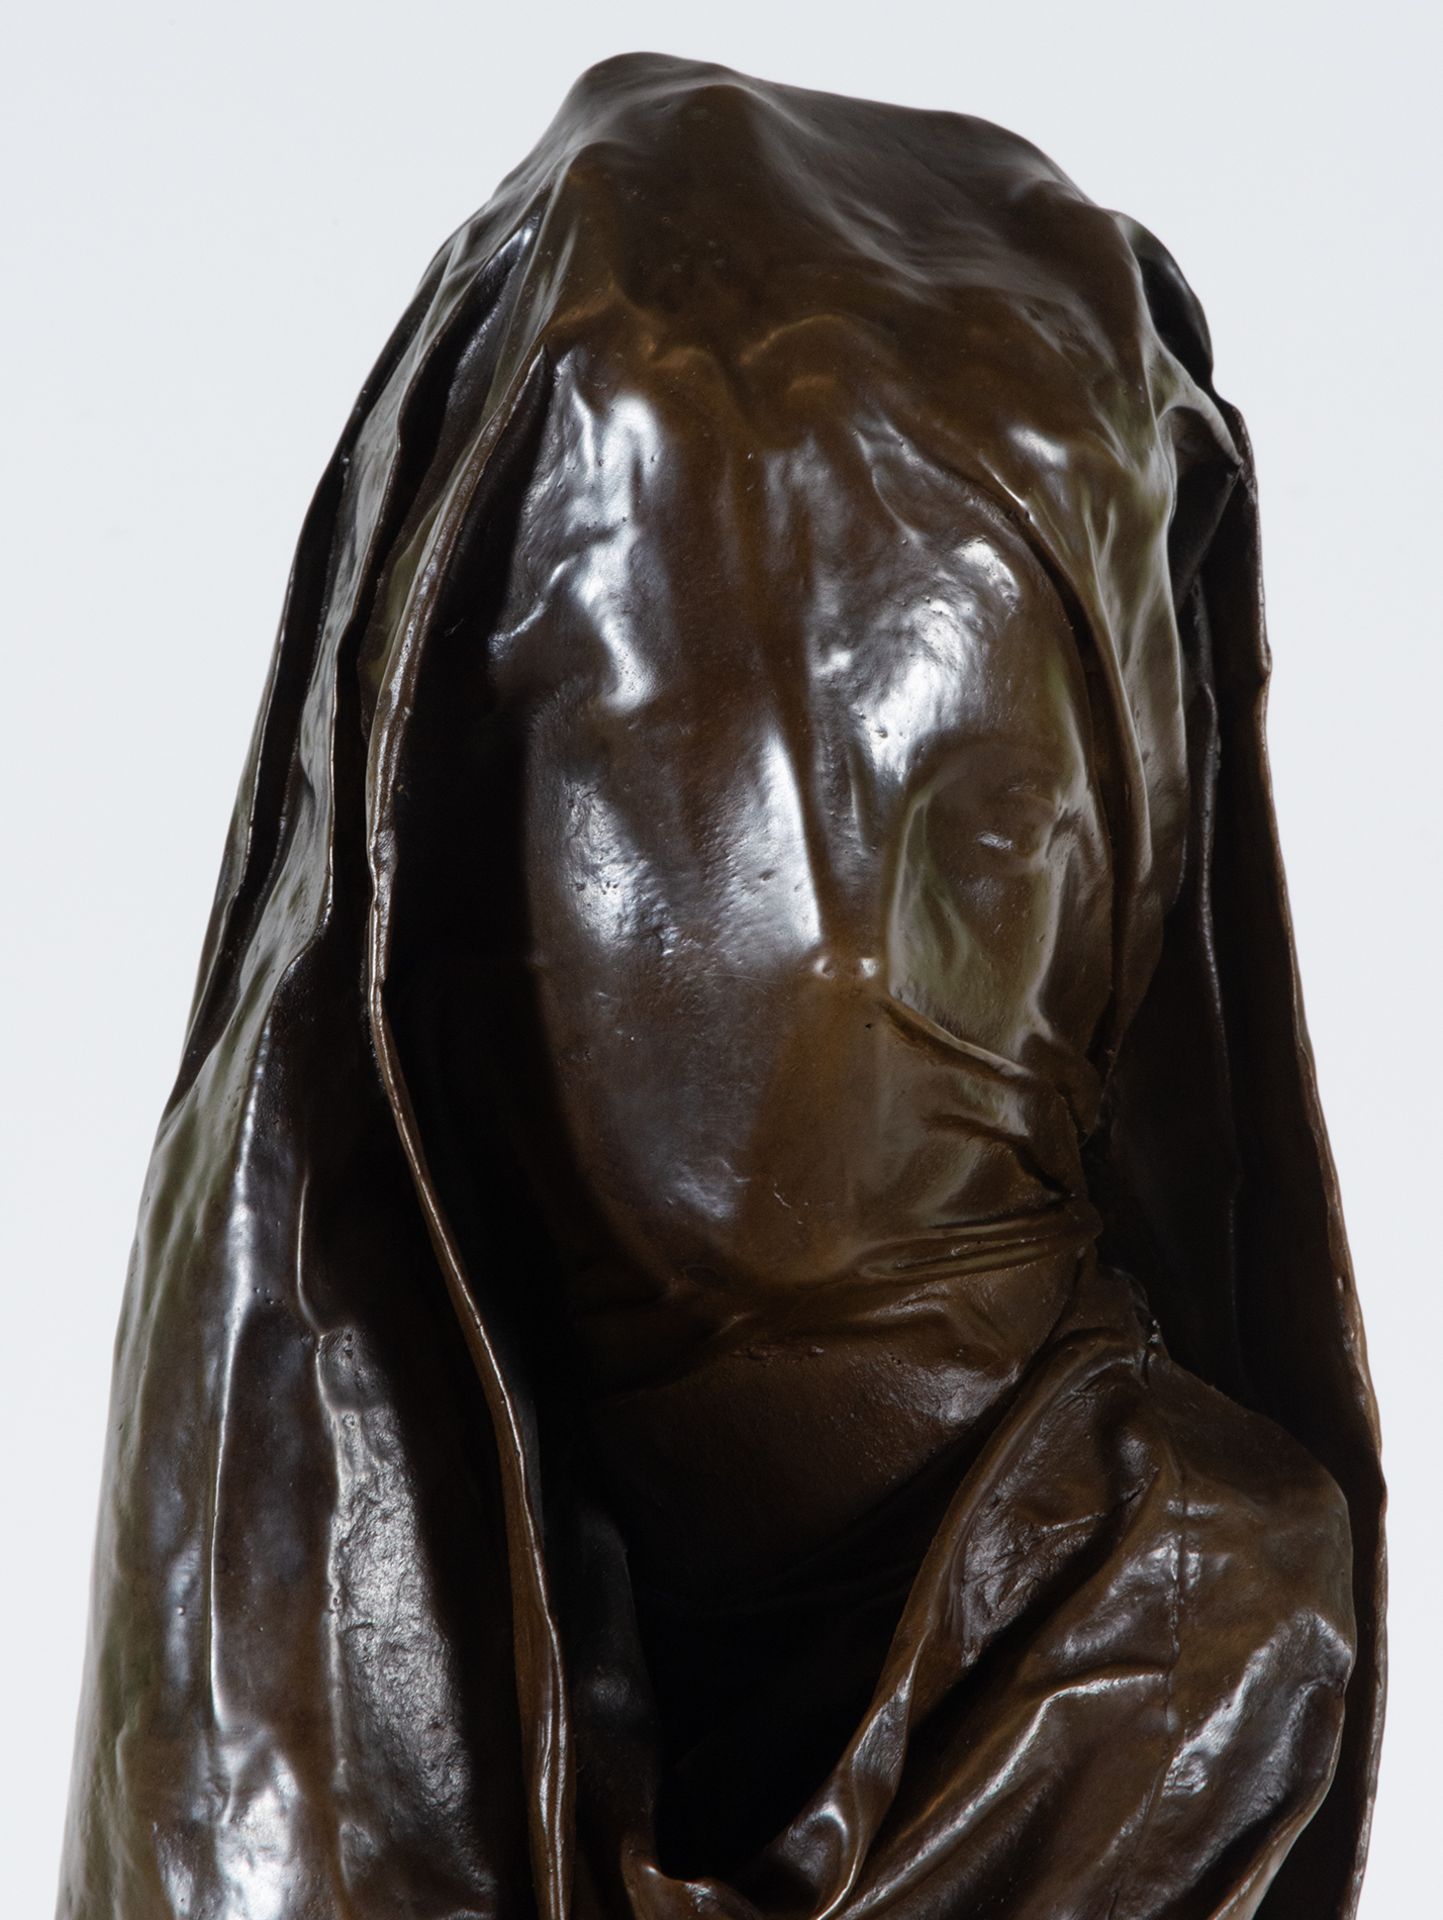 Bust of Lady with Veil, bronze sculpture, 19th century European school - Image 2 of 8